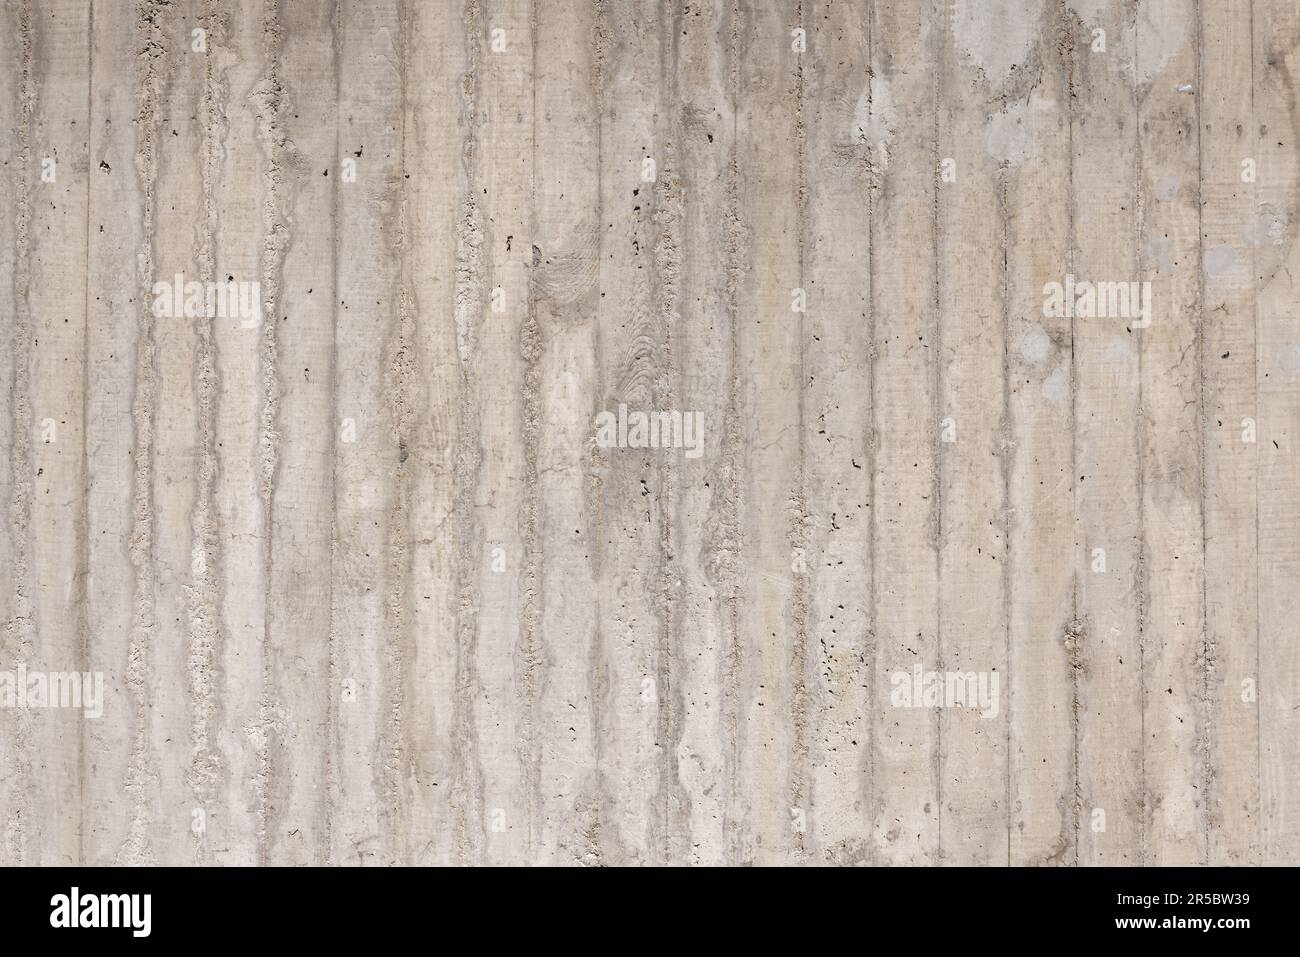 Fair Faced Concrete Wall with Vertical Wood Linings Imprints Stock Photo